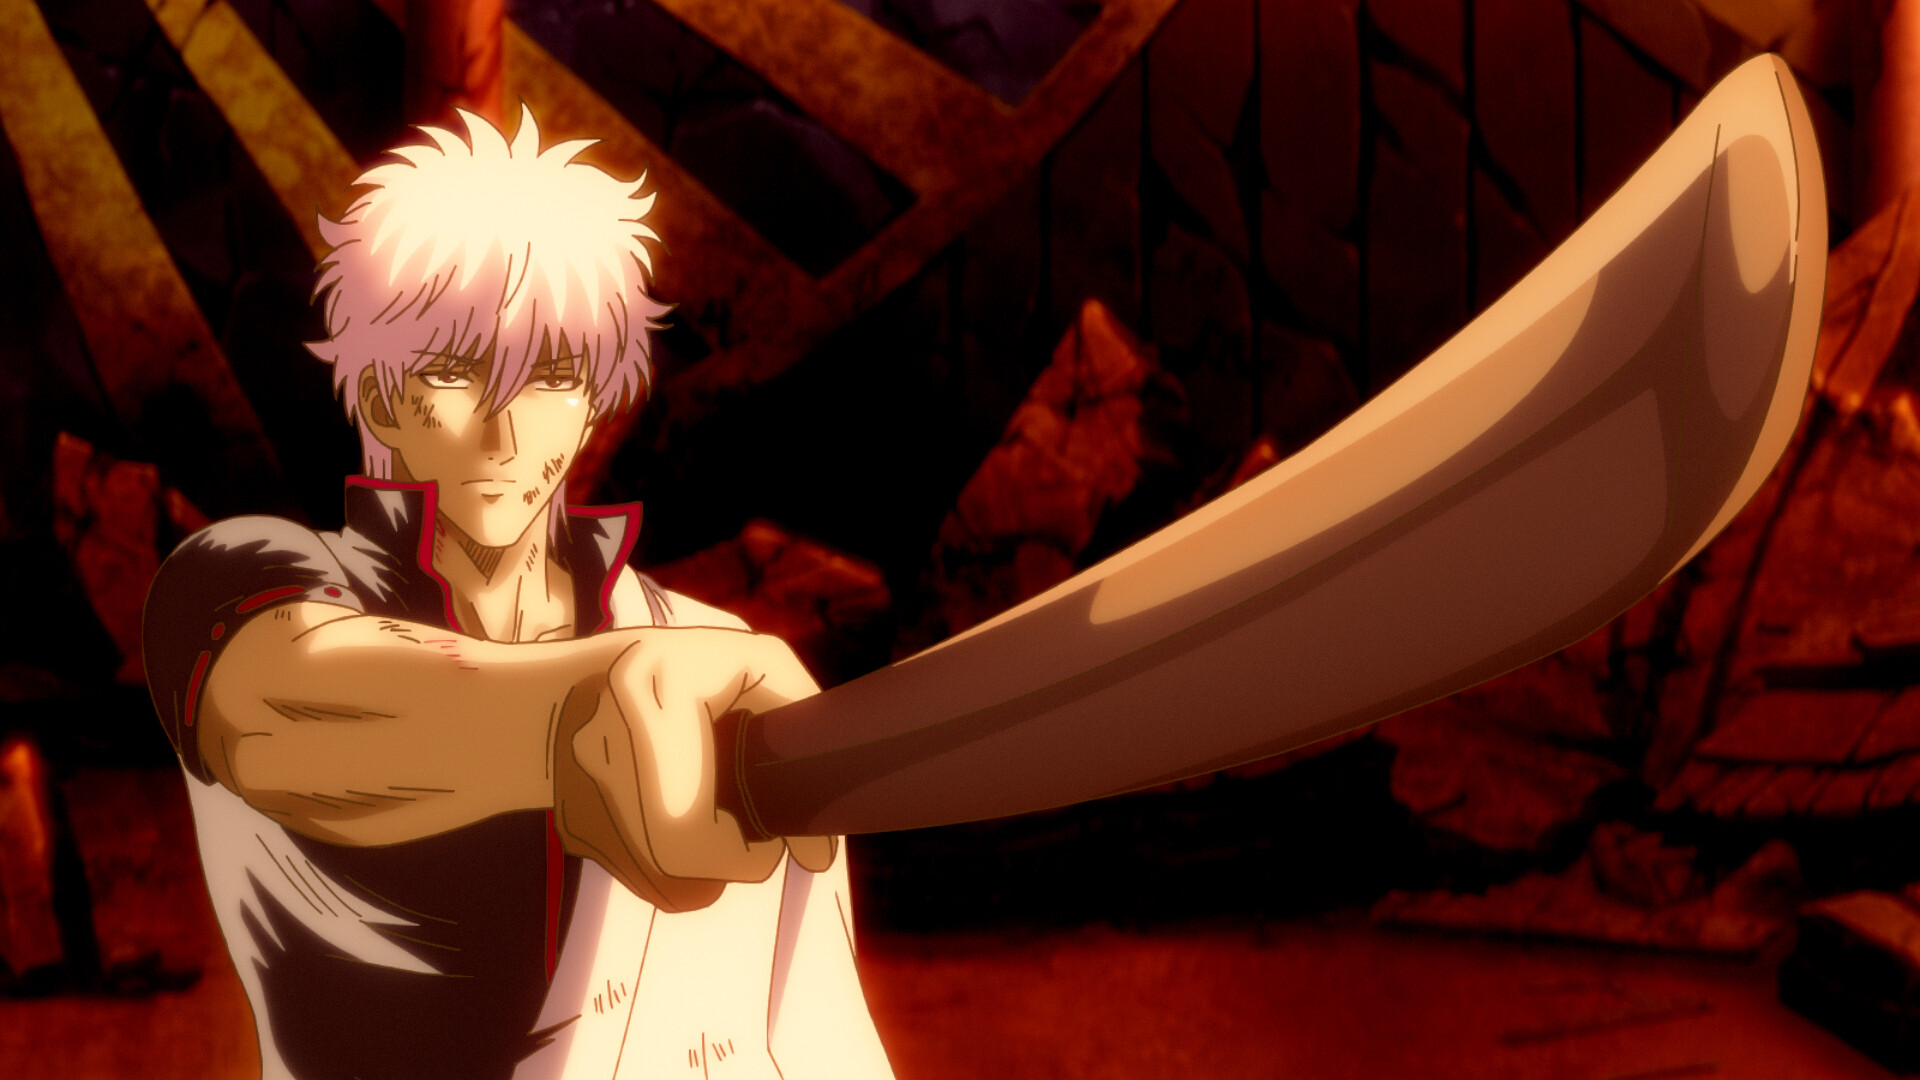 Gintama (TV Series): White demon, Capable of turning the tide of any battle, Called "The Ace" by Katsura and Takasugi. 1920x1080 Full HD Wallpaper.